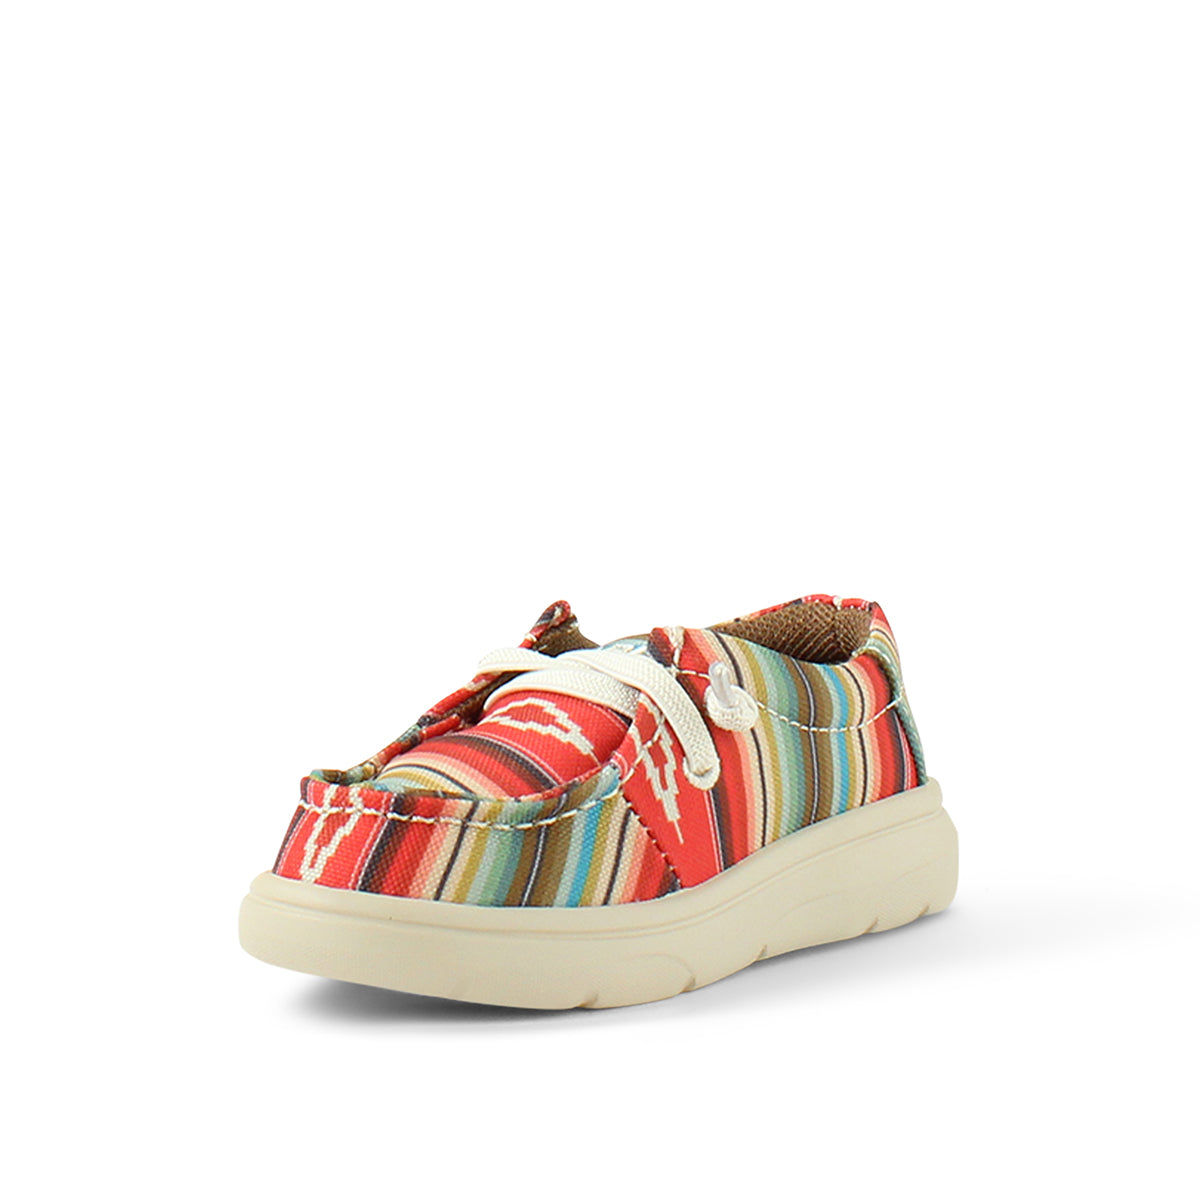 Ariat Hilo Pastel Serape Style Lil' Stompers Kids Casual Shoes